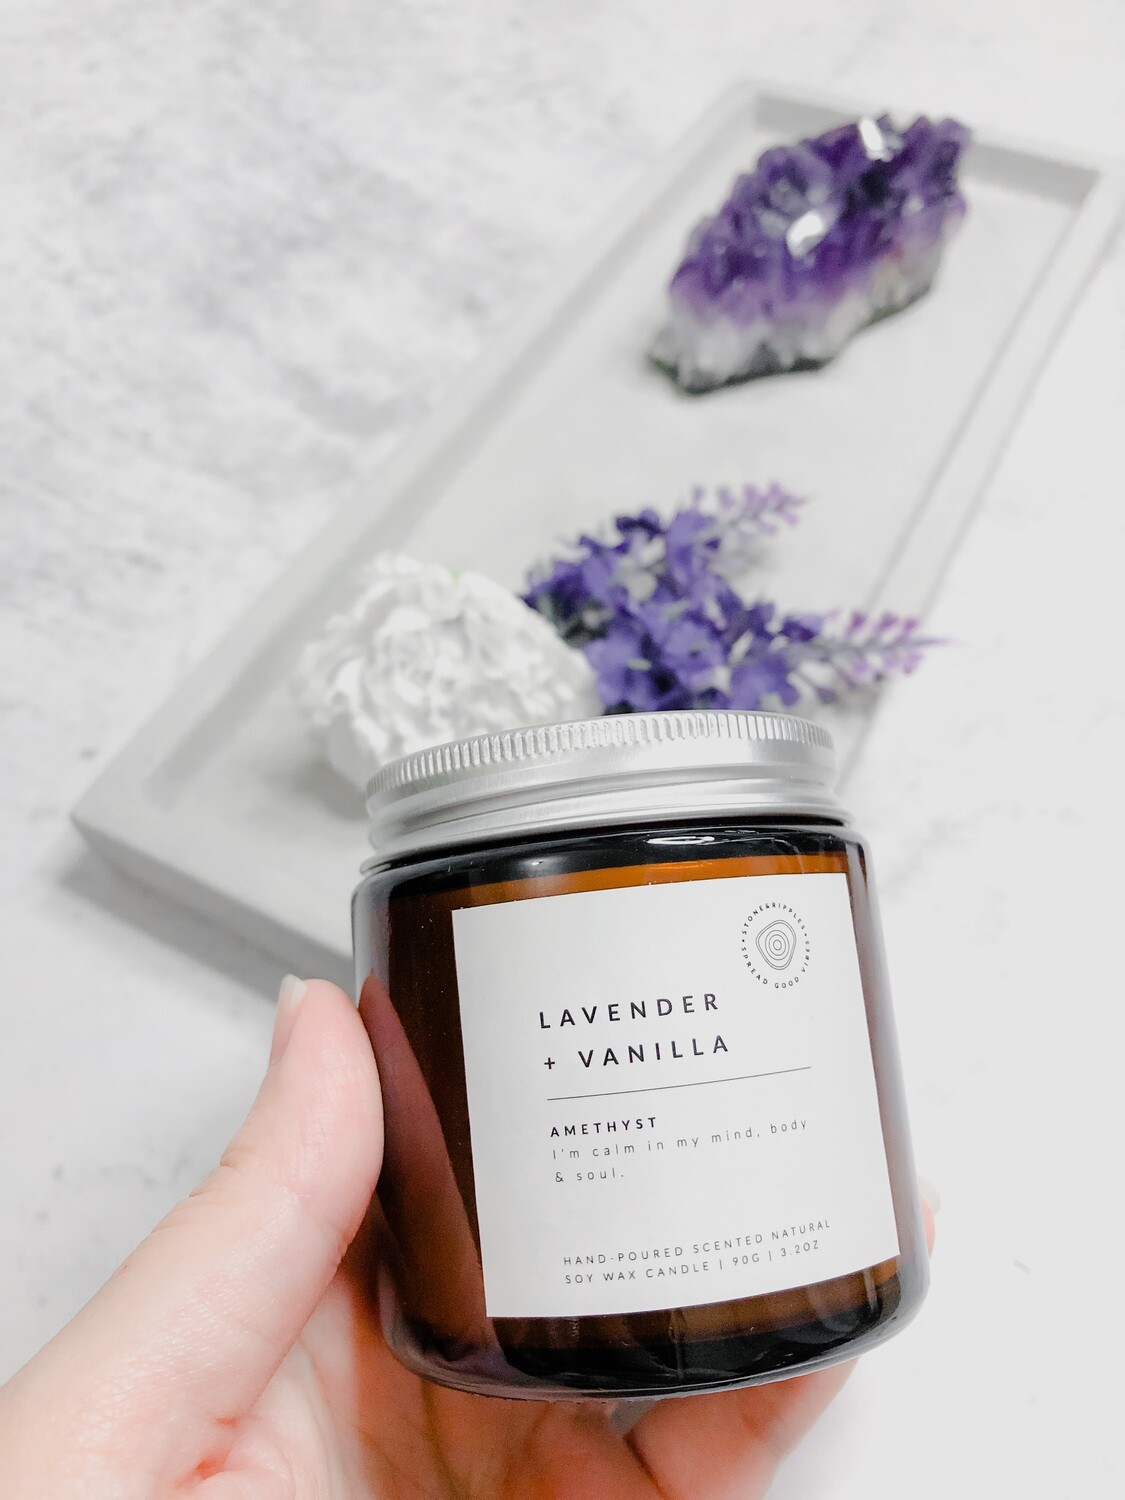 LAVENDER + VANILLA with Amethyst Candle